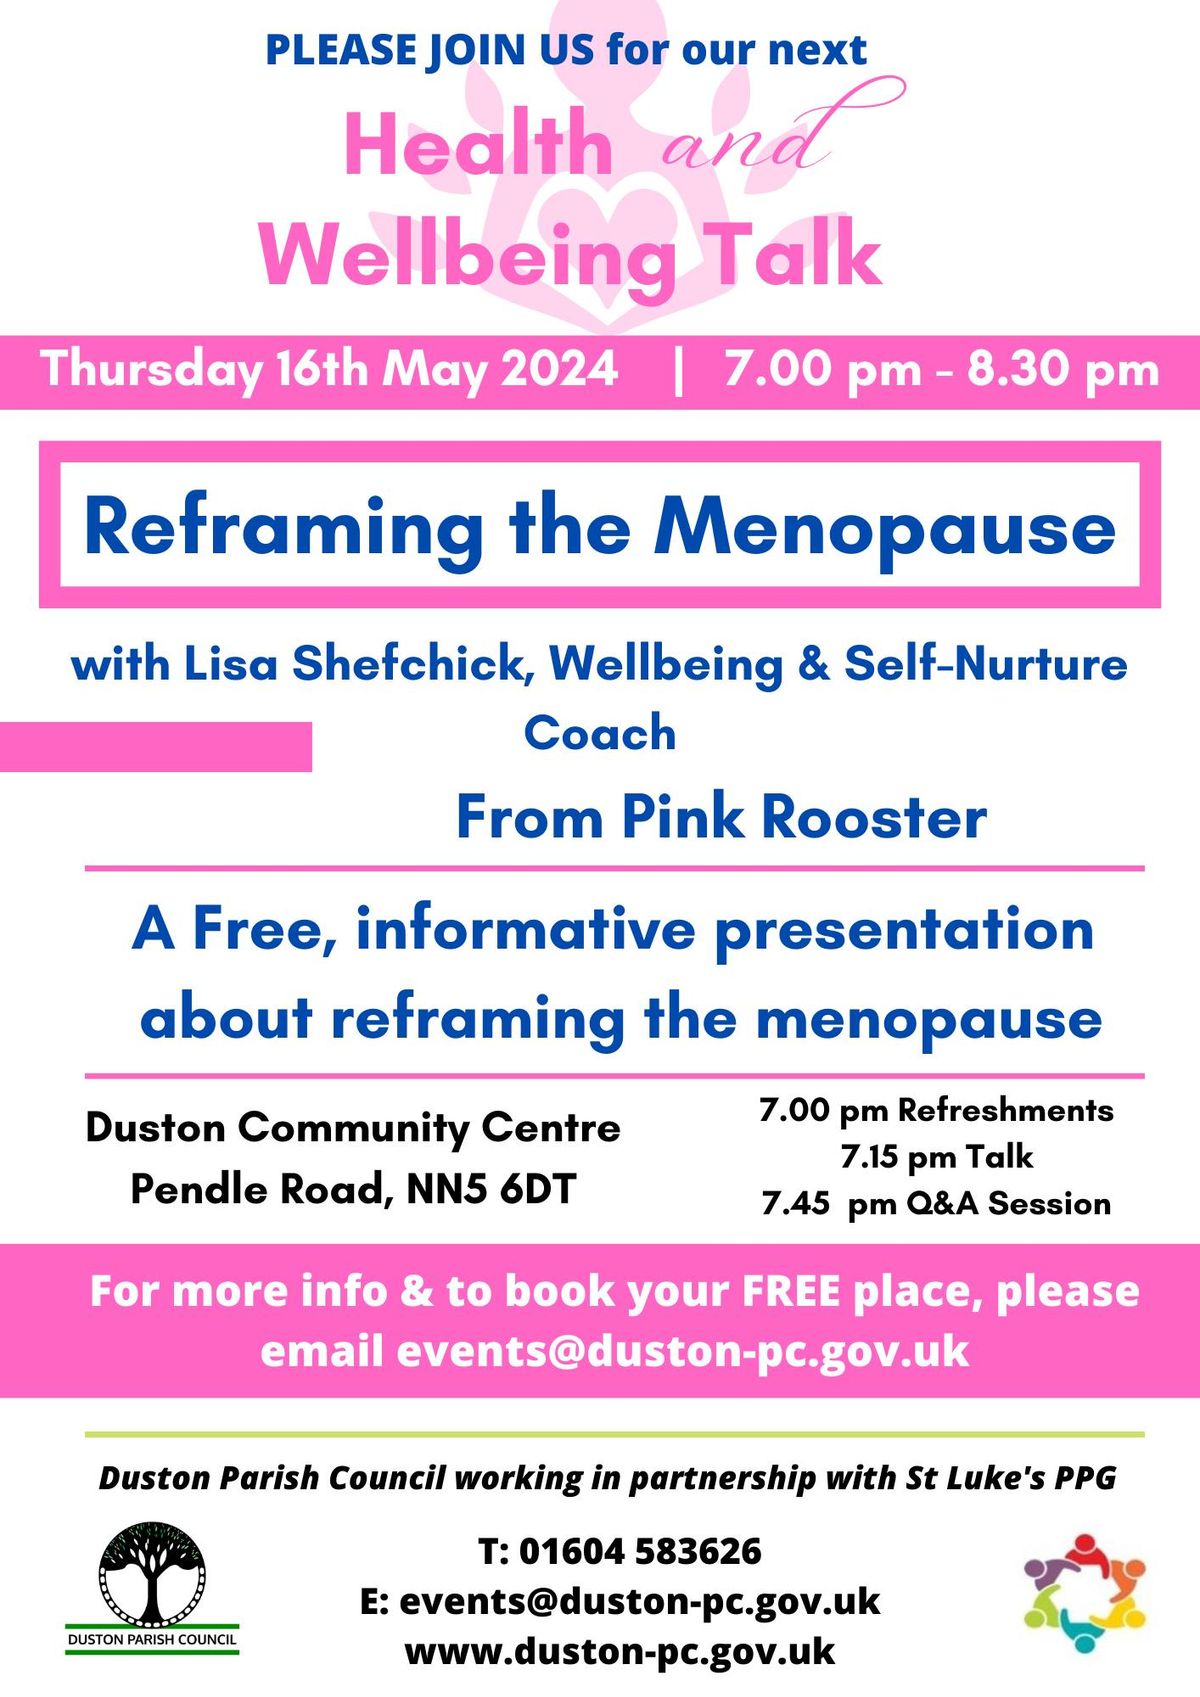 Health & Wellbeing Talk on Reframing the Menopause